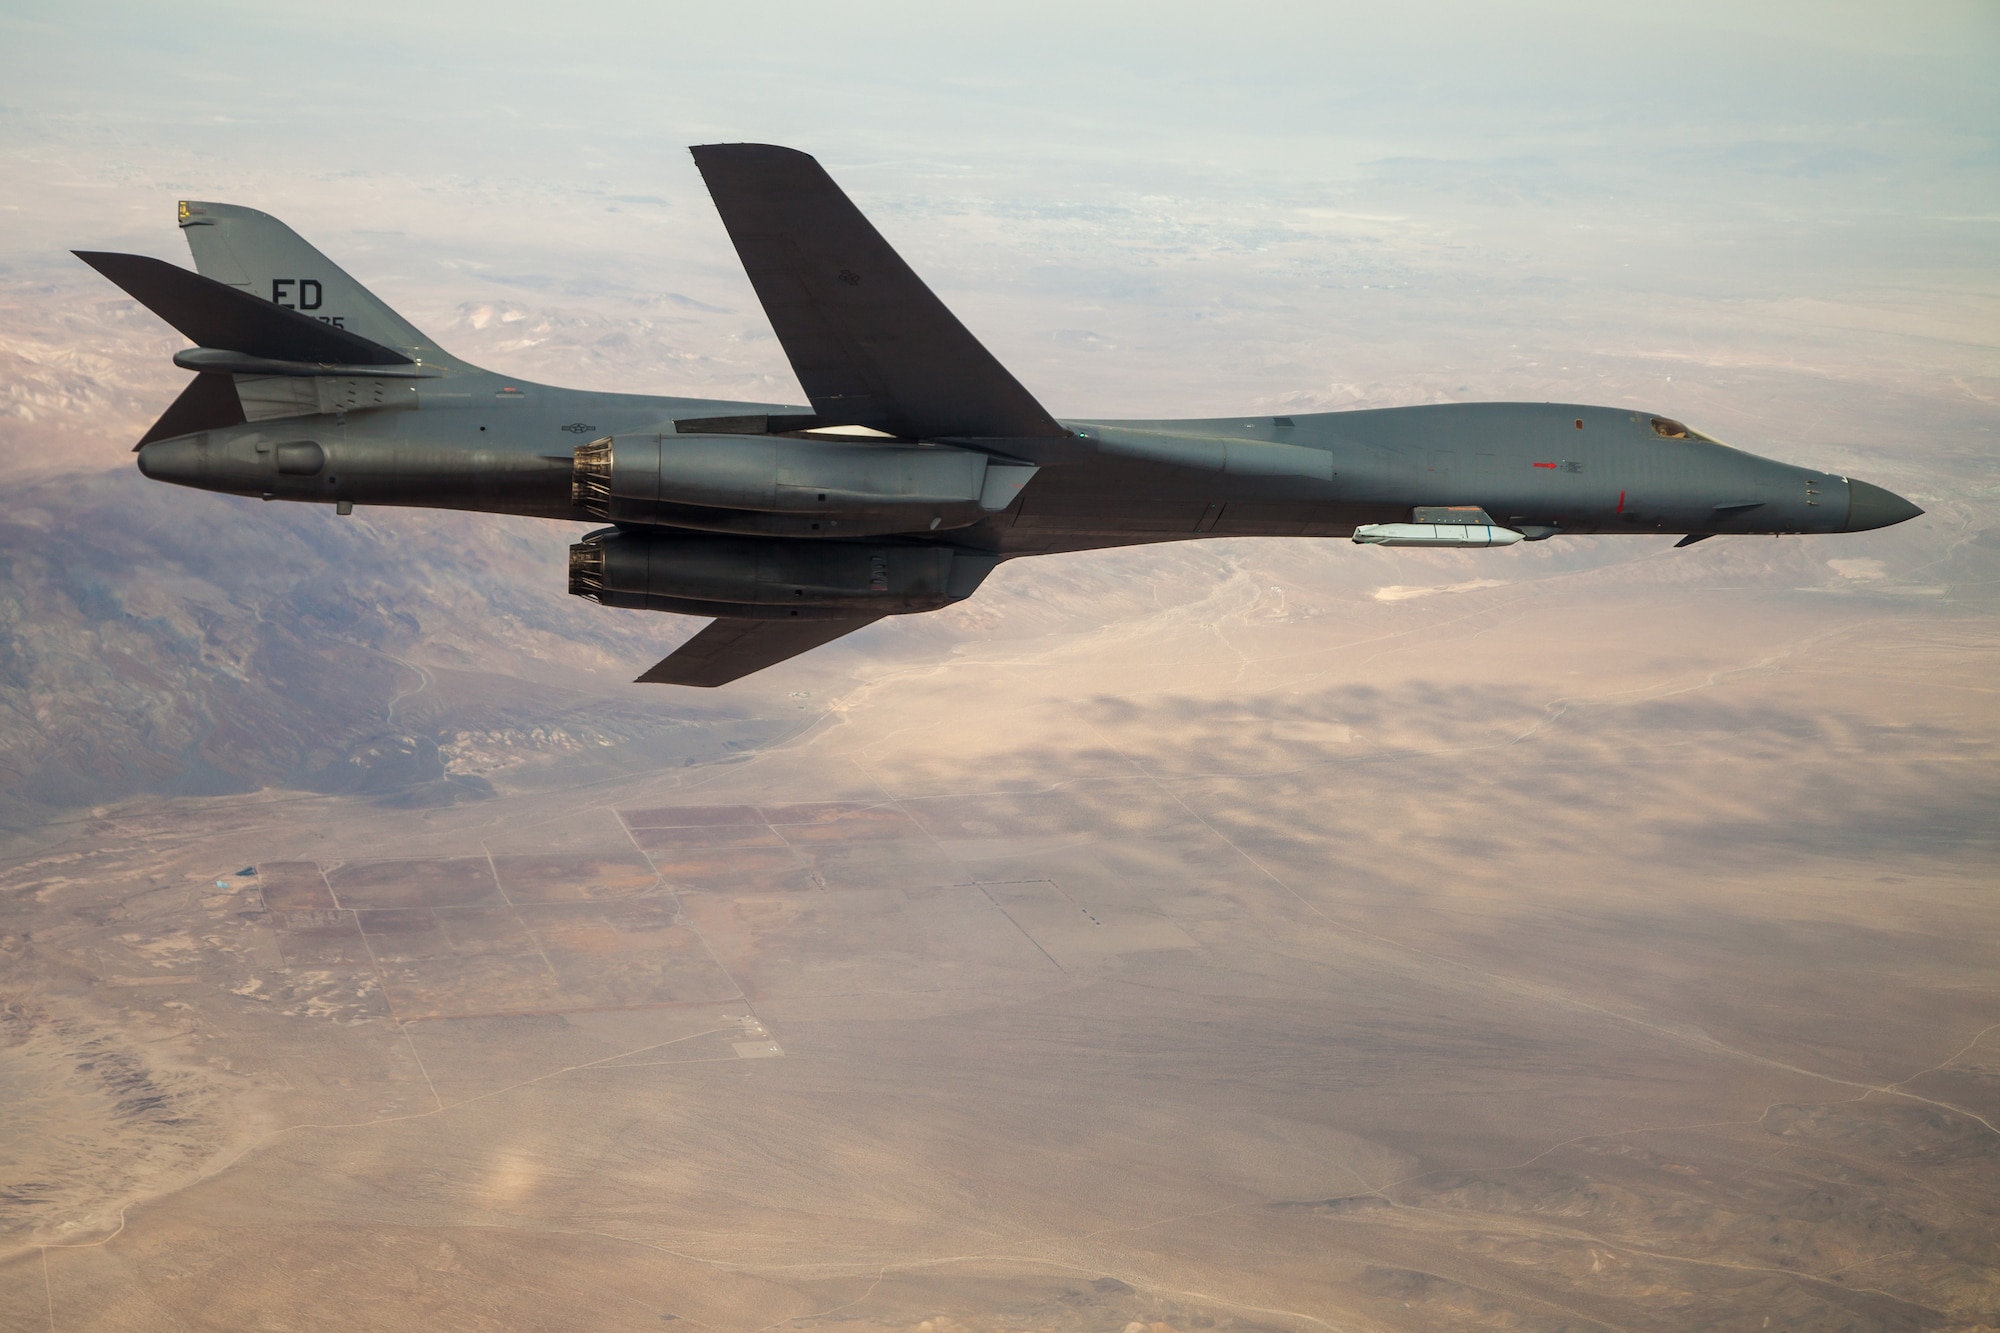 A B-1B Lancer with a Joint Air-to-Surface Standoff Missile (JASSM) flies in the skies above Edwards Air Force Base, California, Nov. 20. The flight was a demonstration of the B-1B’s external weapons carriage capabilities. (Air Force photo by Ethan Wagner)